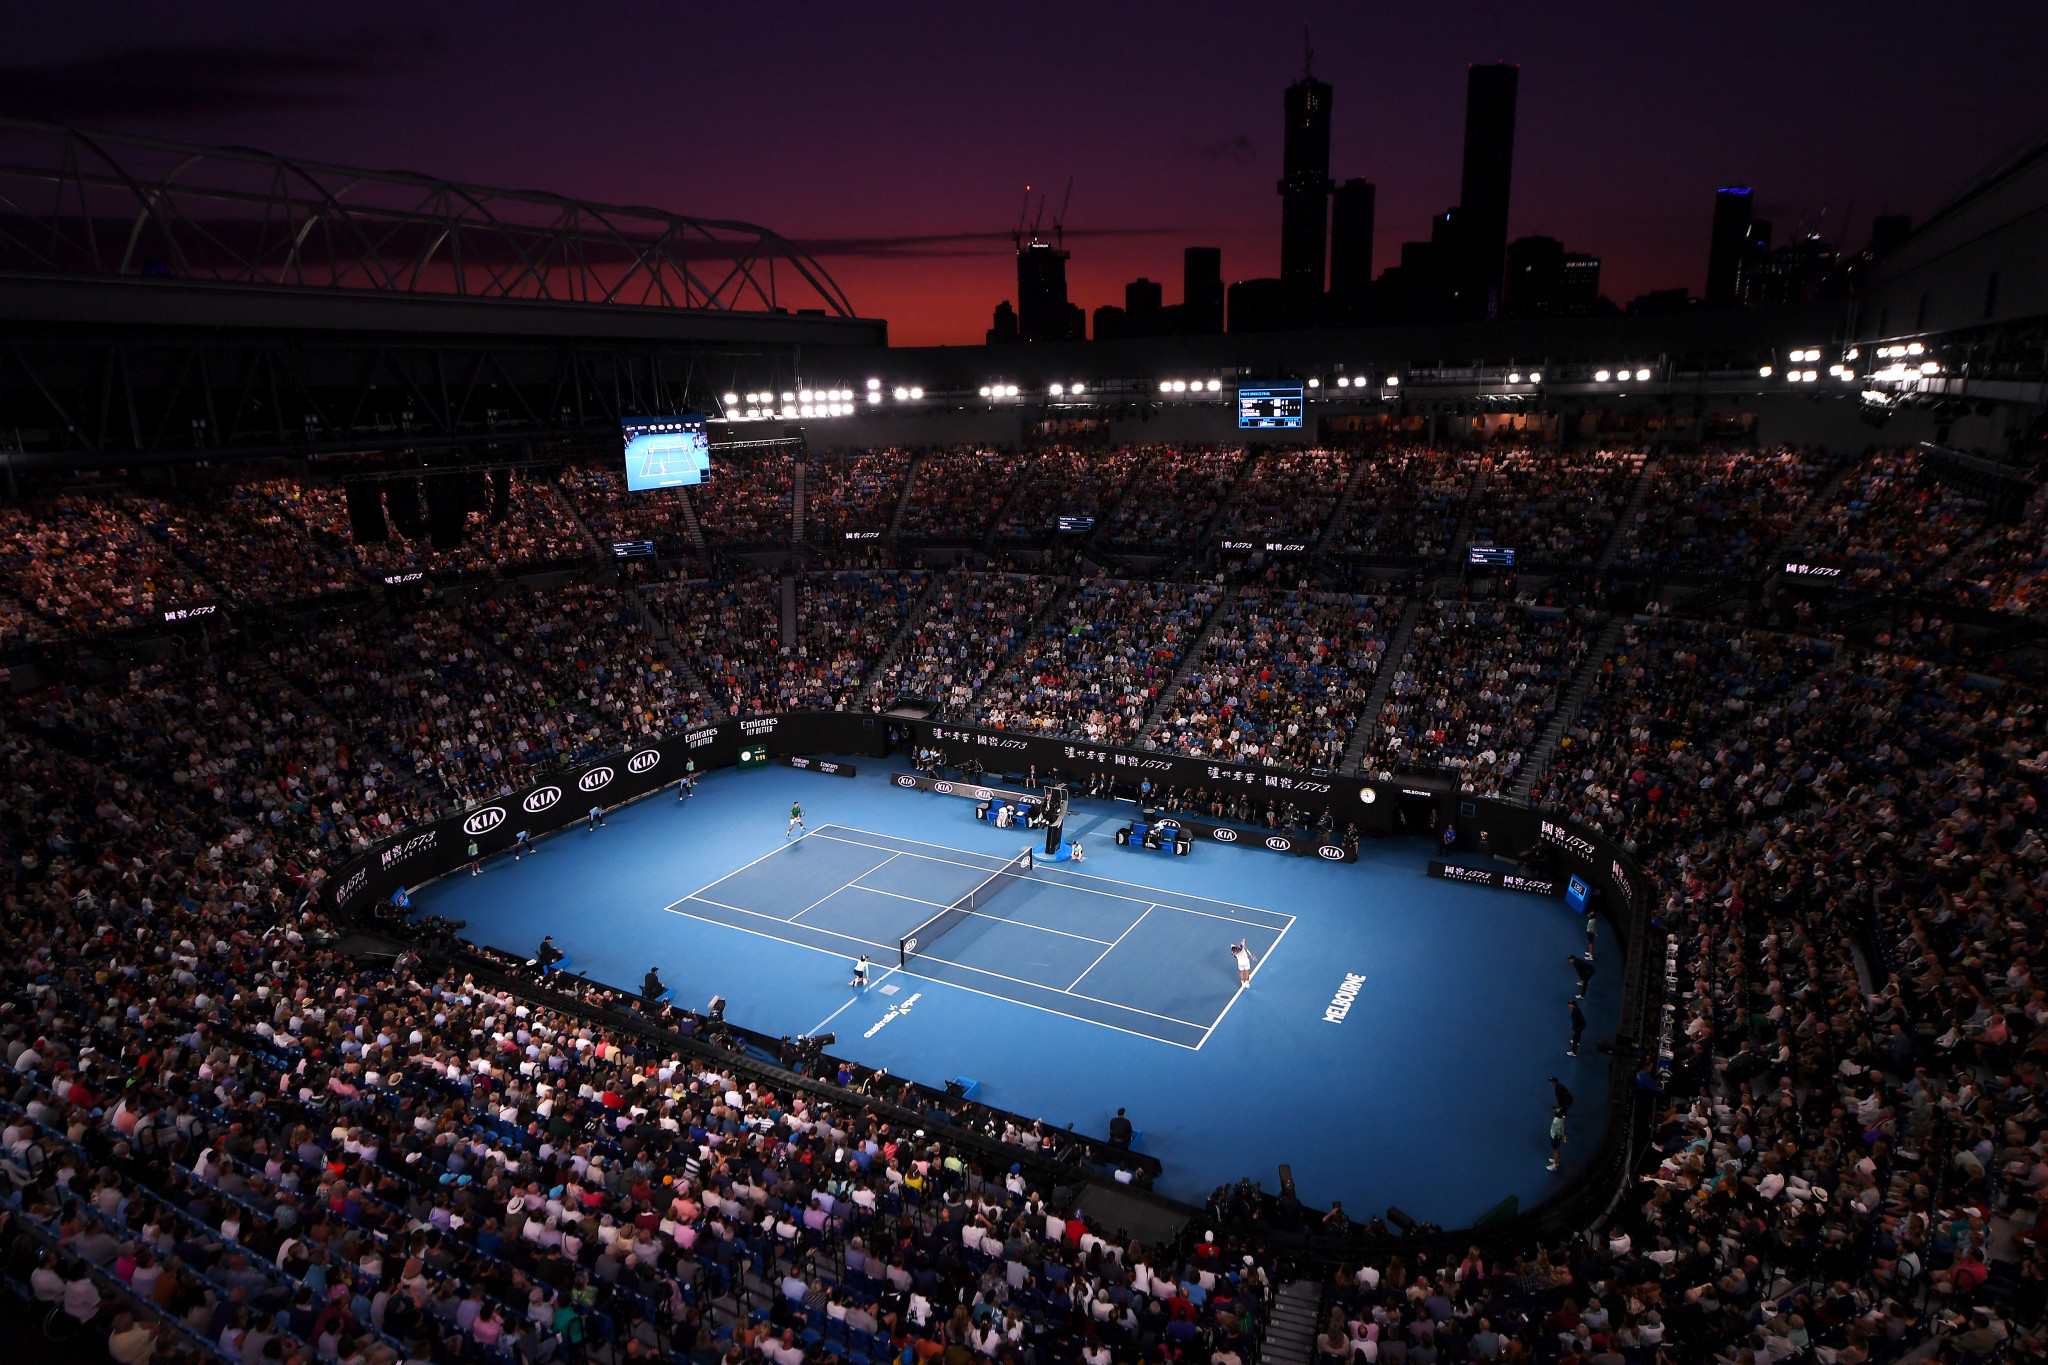 Australian Open moved to February and qualifying event shifted to Doha due to COVID-19